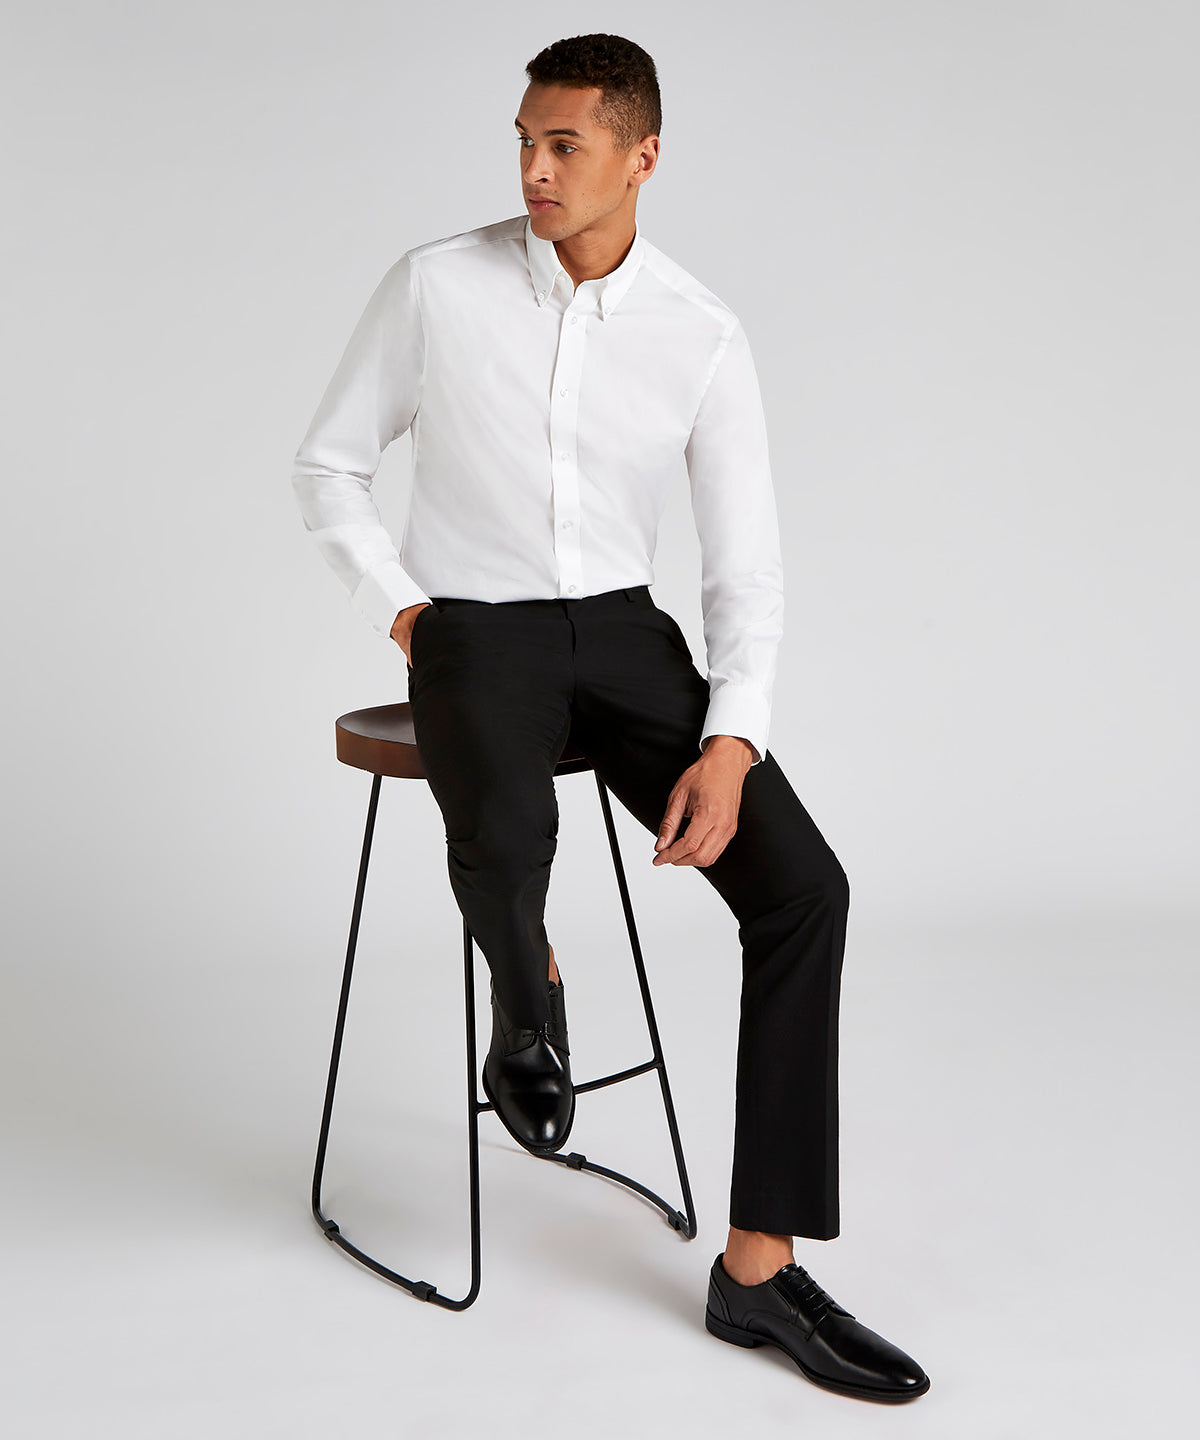 Bolir - City Business Shirt Long-sleeved (tailored Fit)